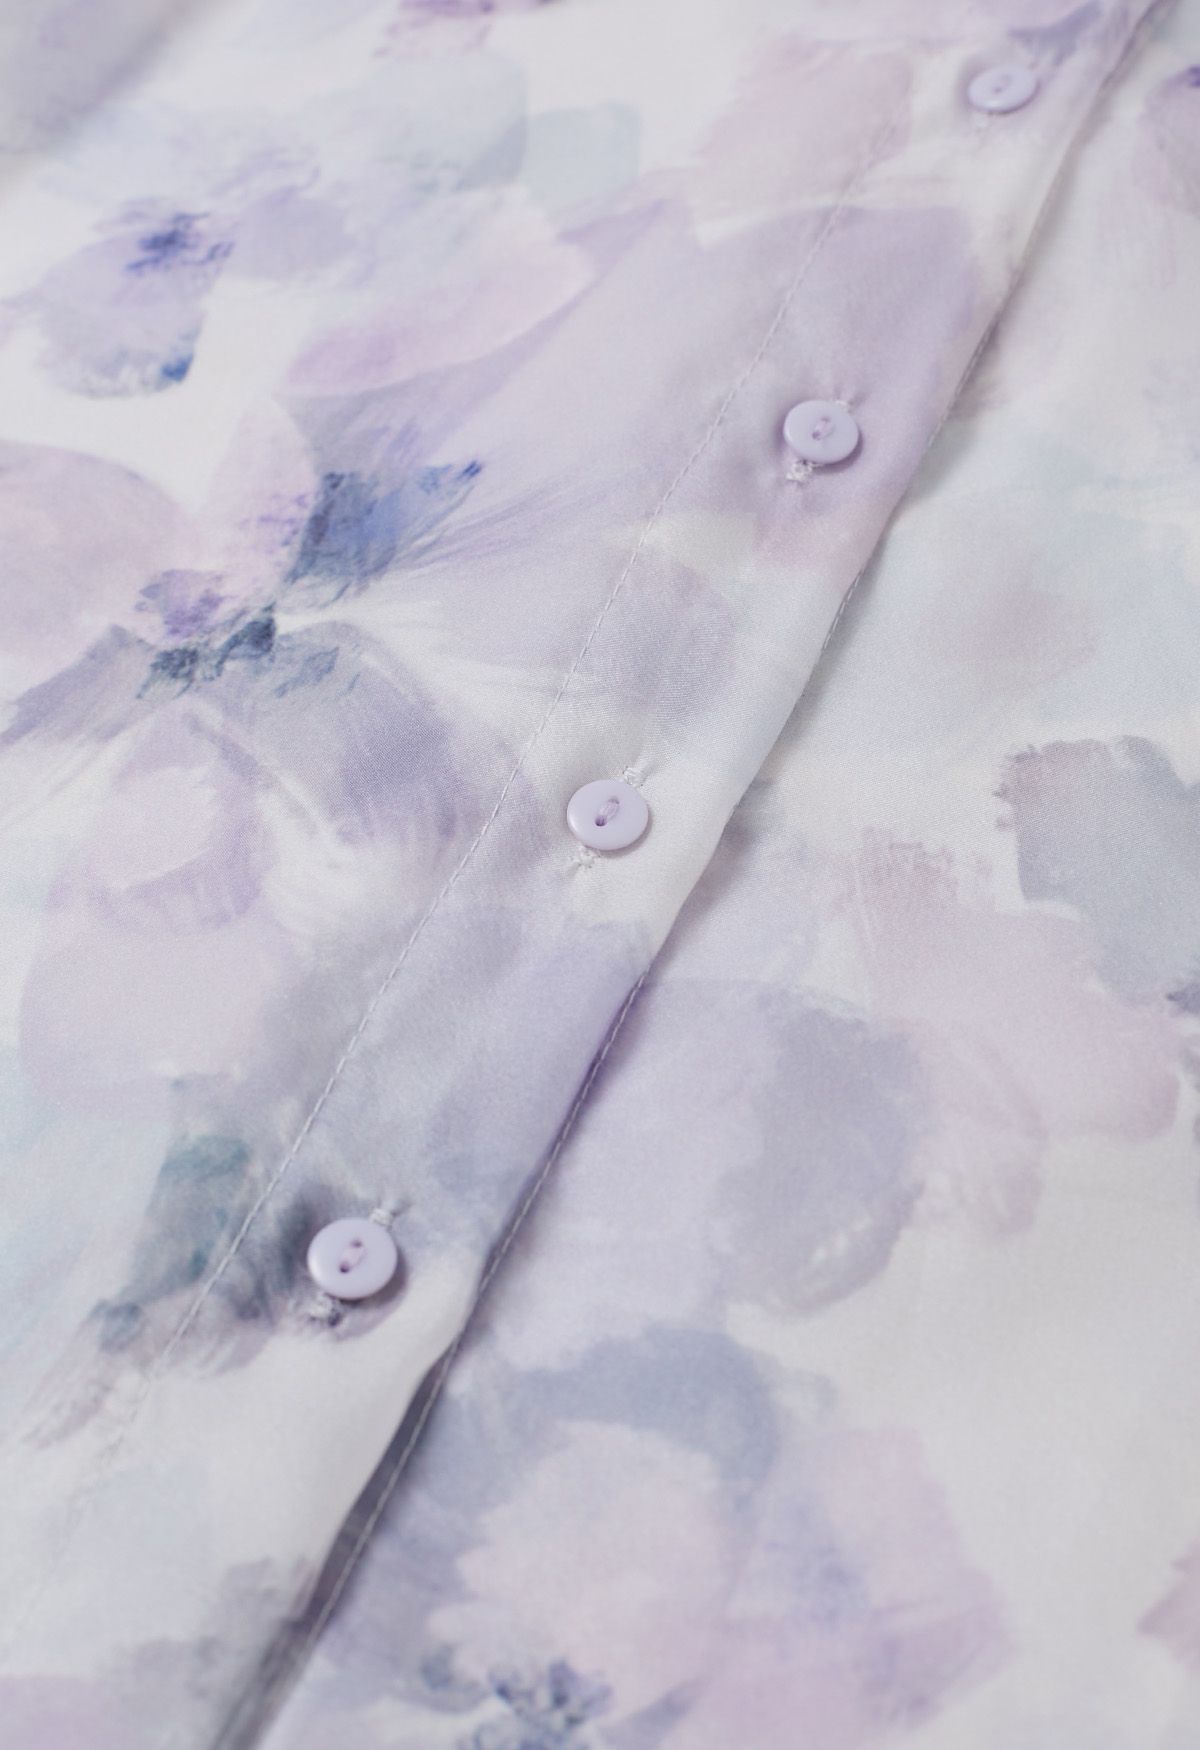 Bowknot Neck Watercolor Floral Sheer Shirt in Lilac